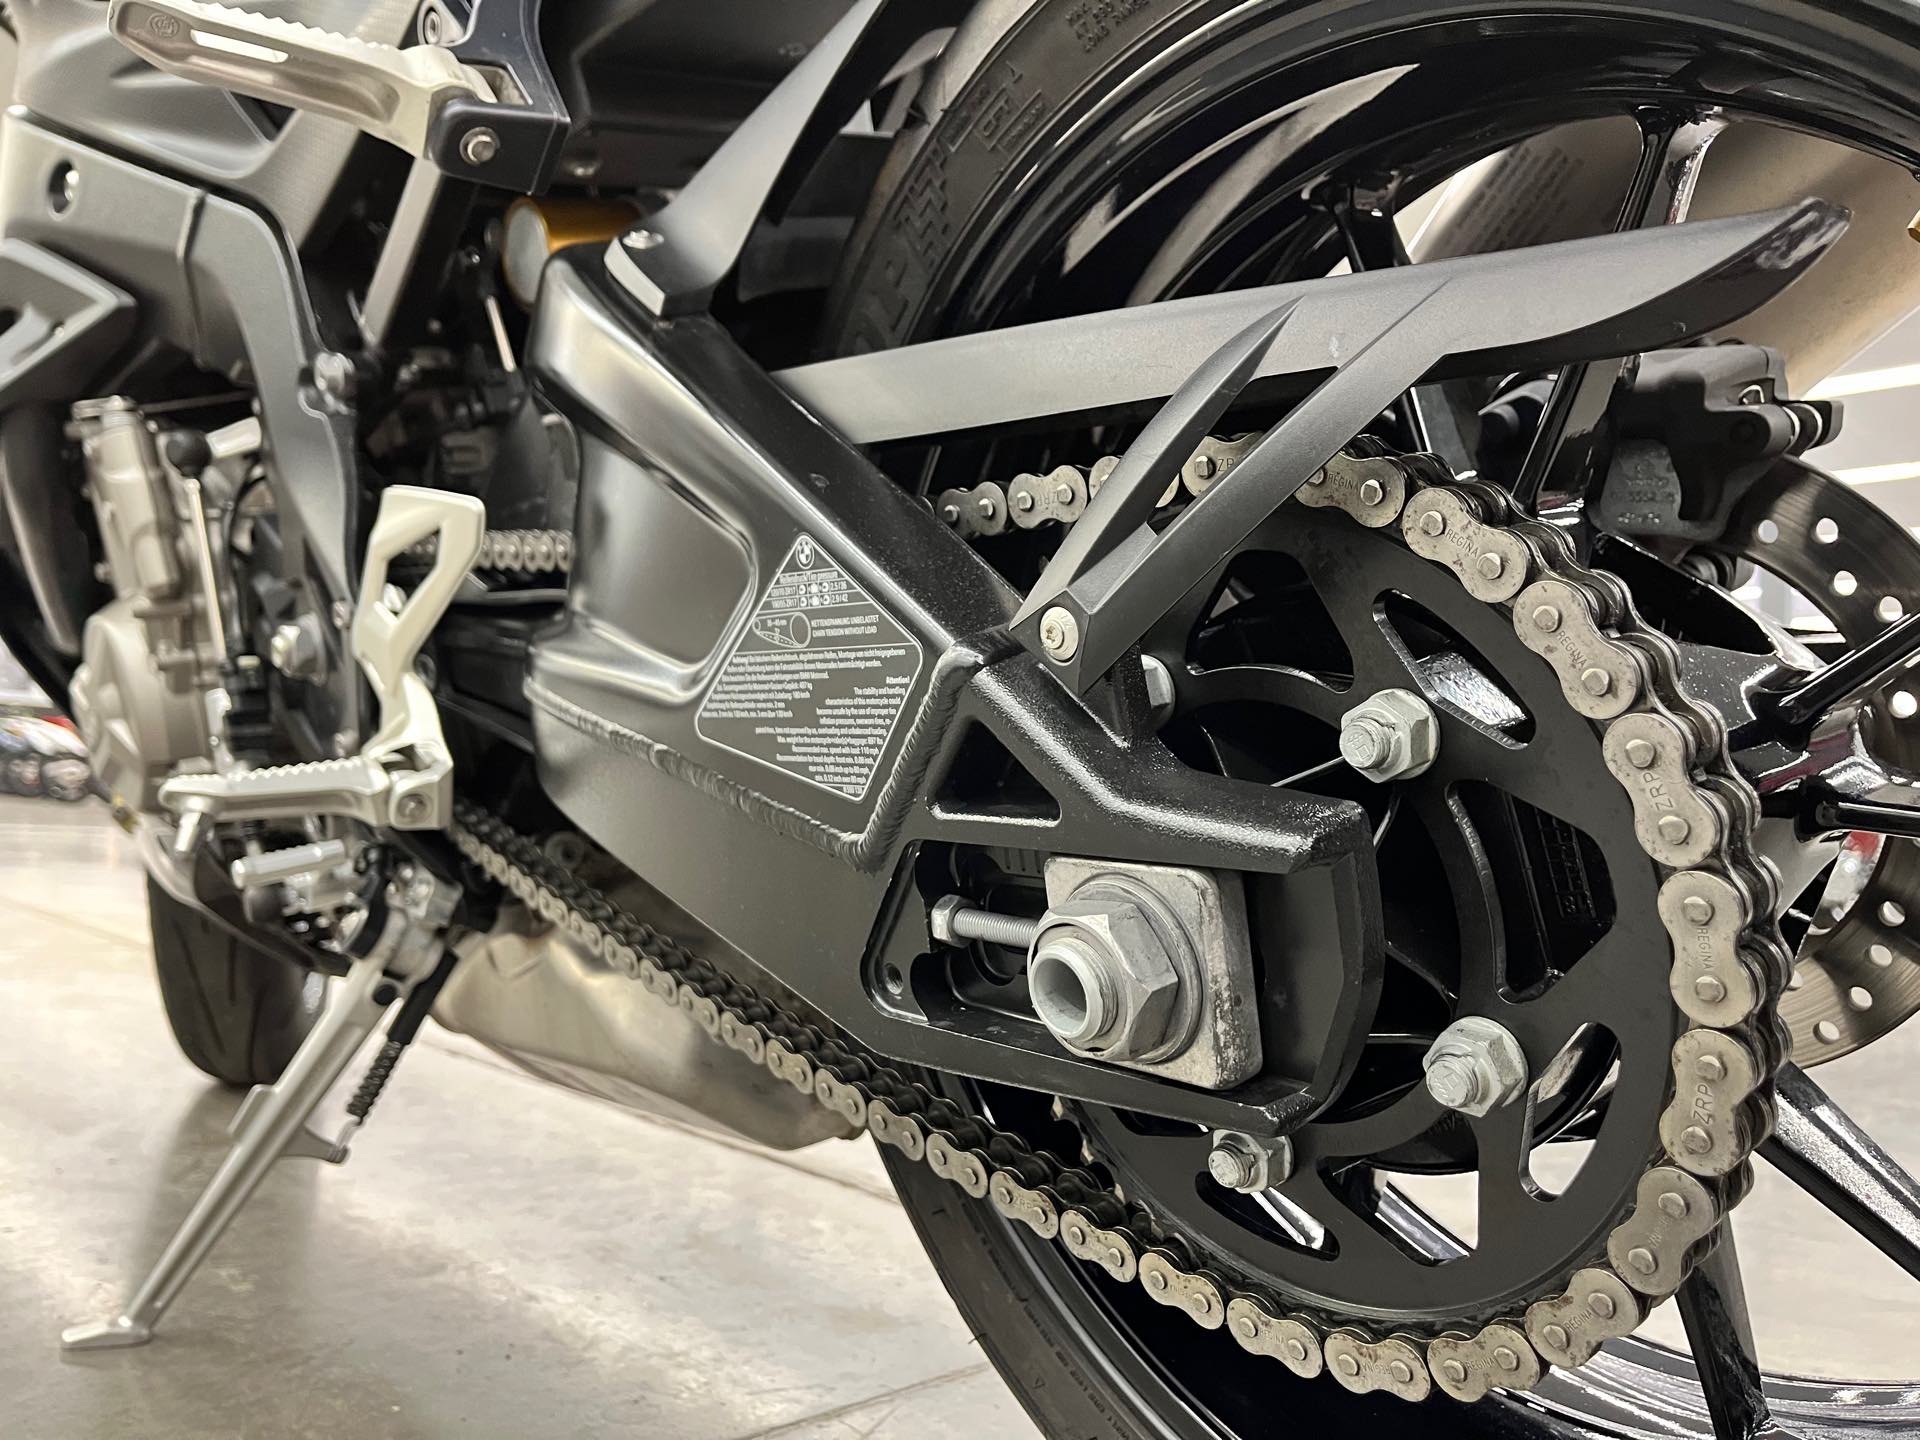 2019 BMW S 1000 R at Aces Motorcycles - Denver